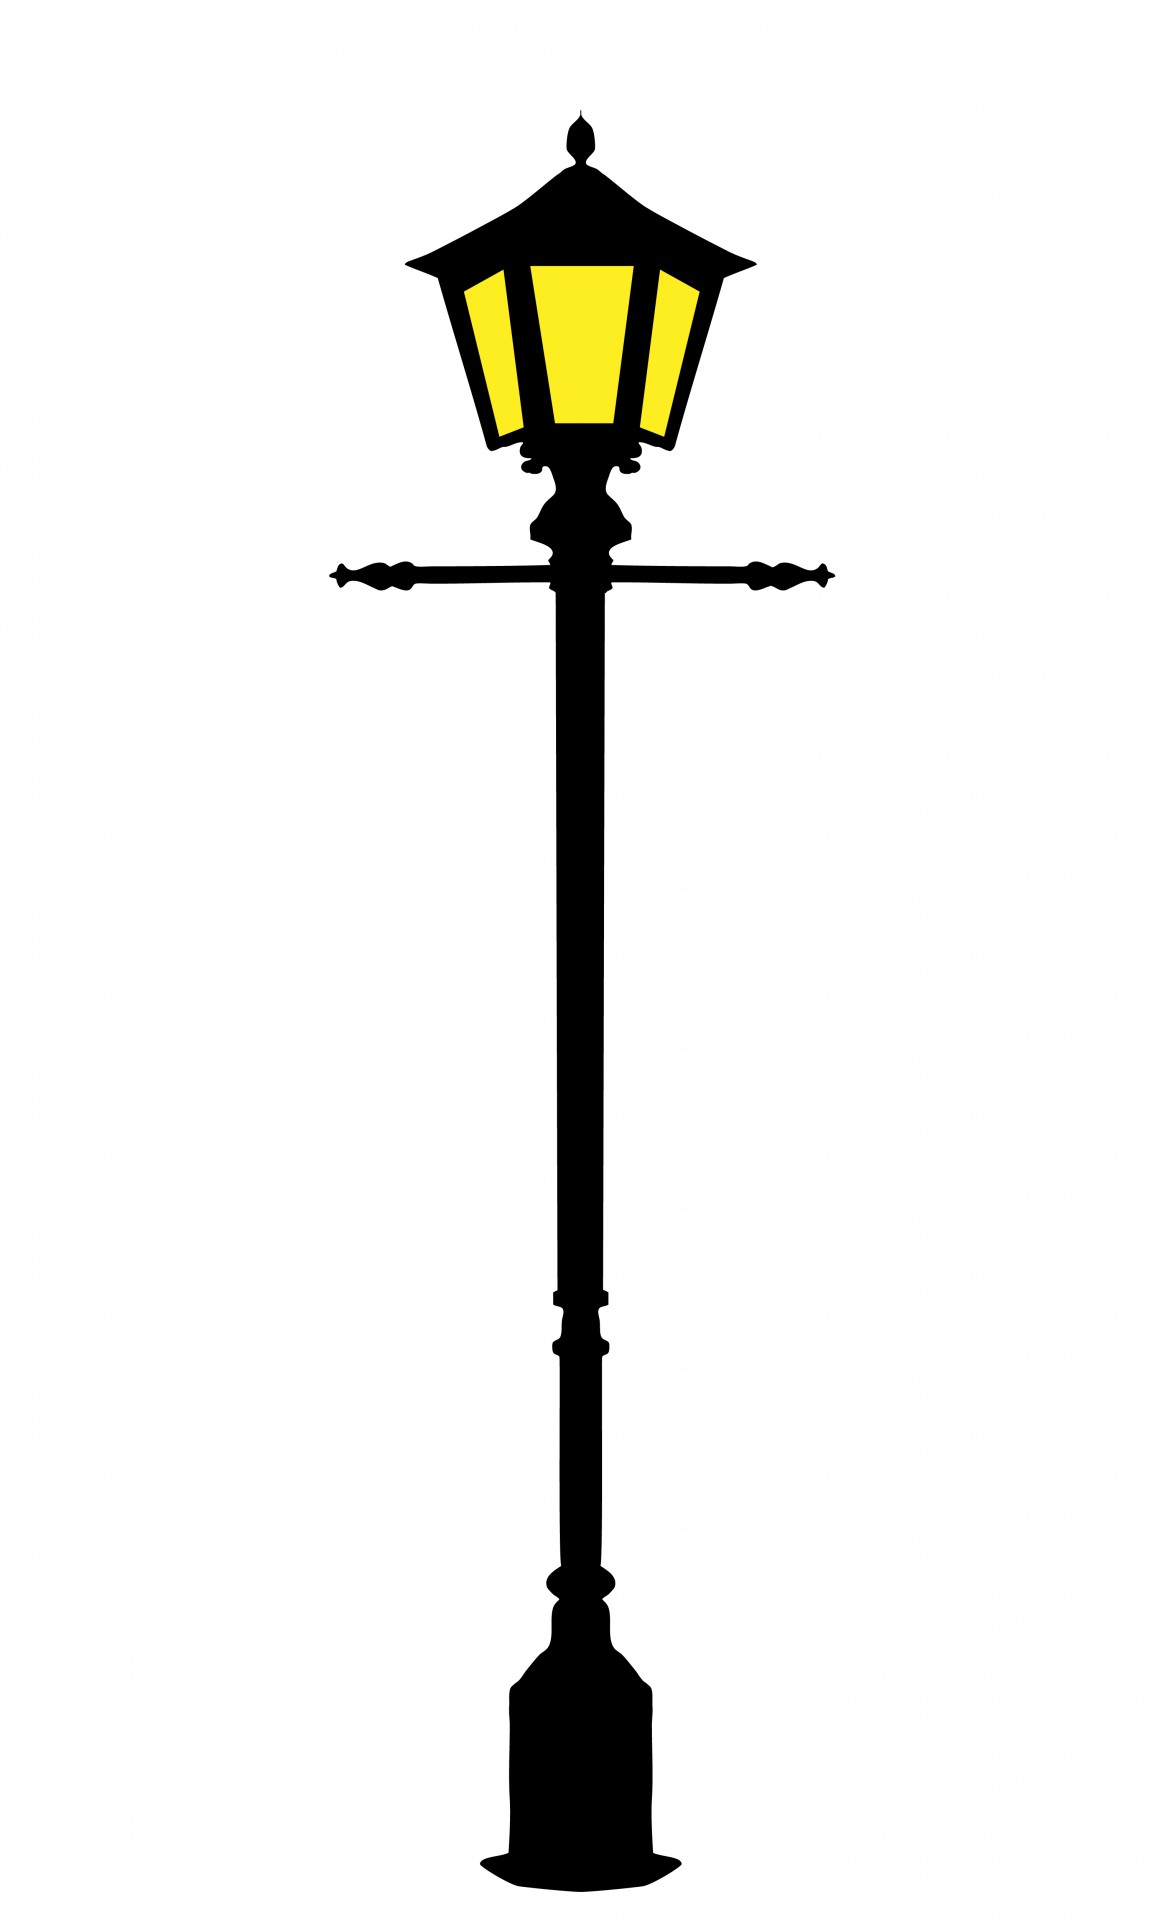 Lamp Post Silhouette Clipart.